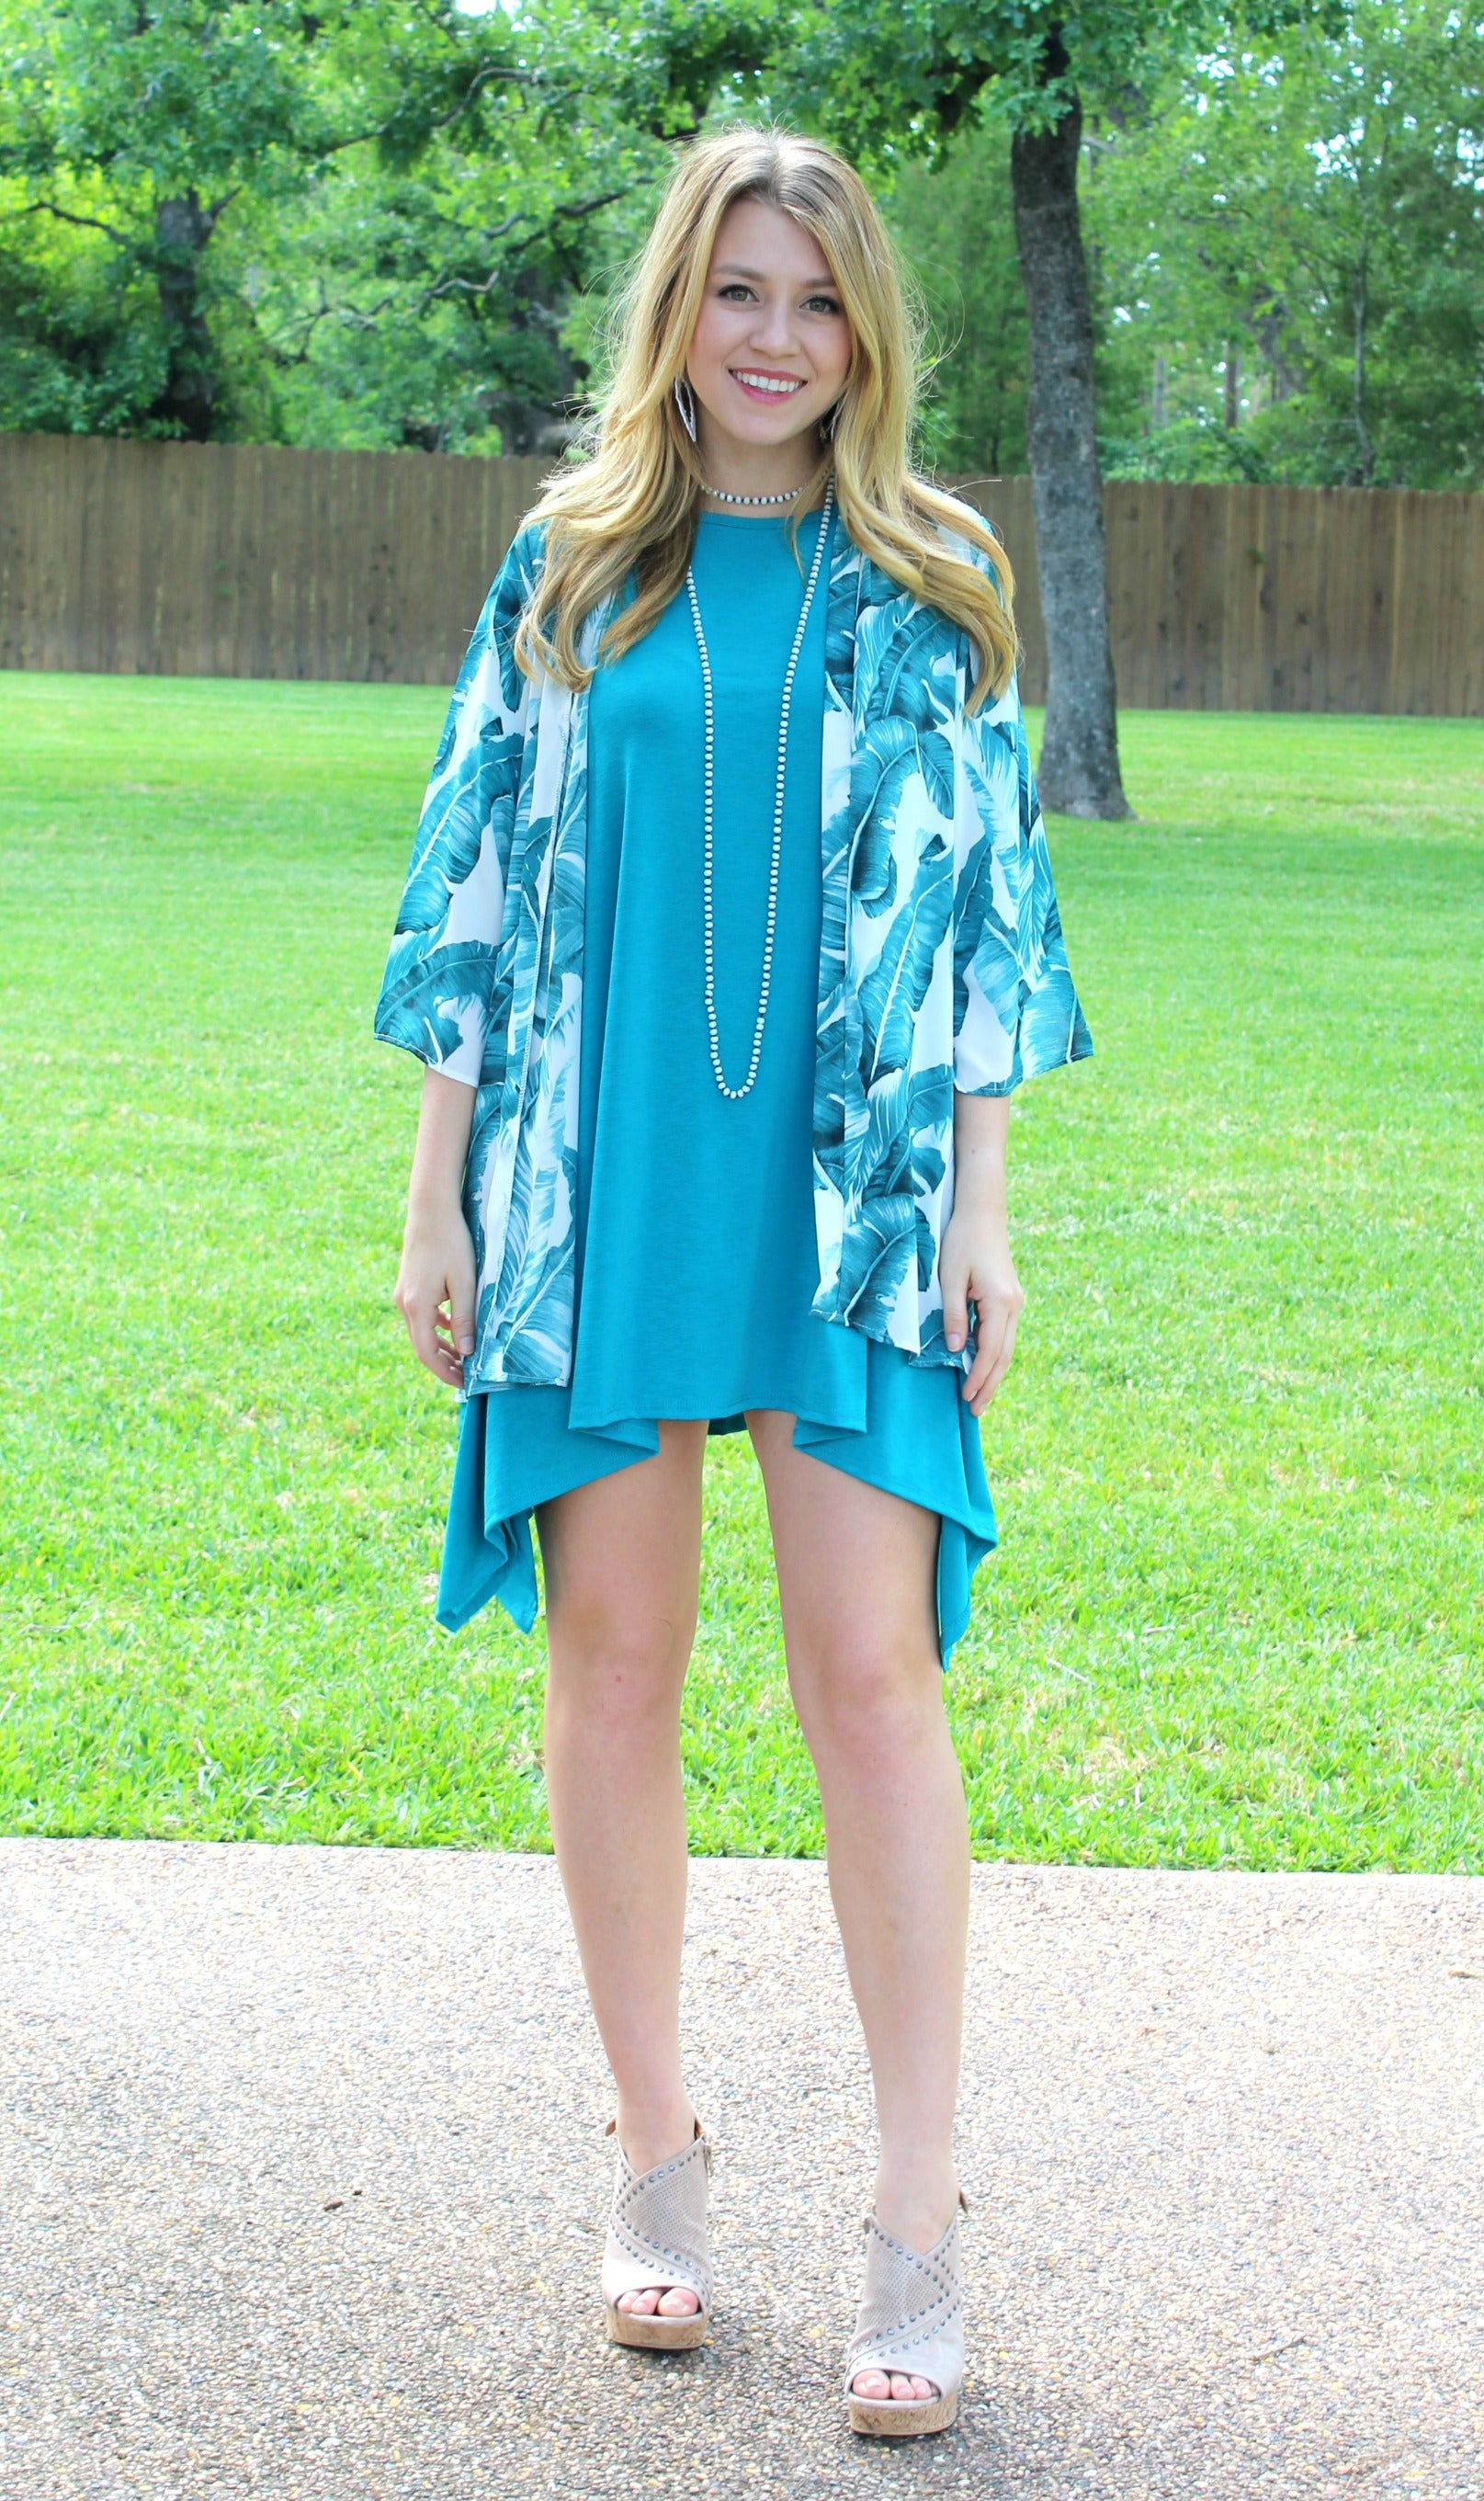 Last Chance Size Small & Medium | Not A Doubt Asymmetrical Hemline Tunic in Turquoise - Giddy Up Glamour Boutique